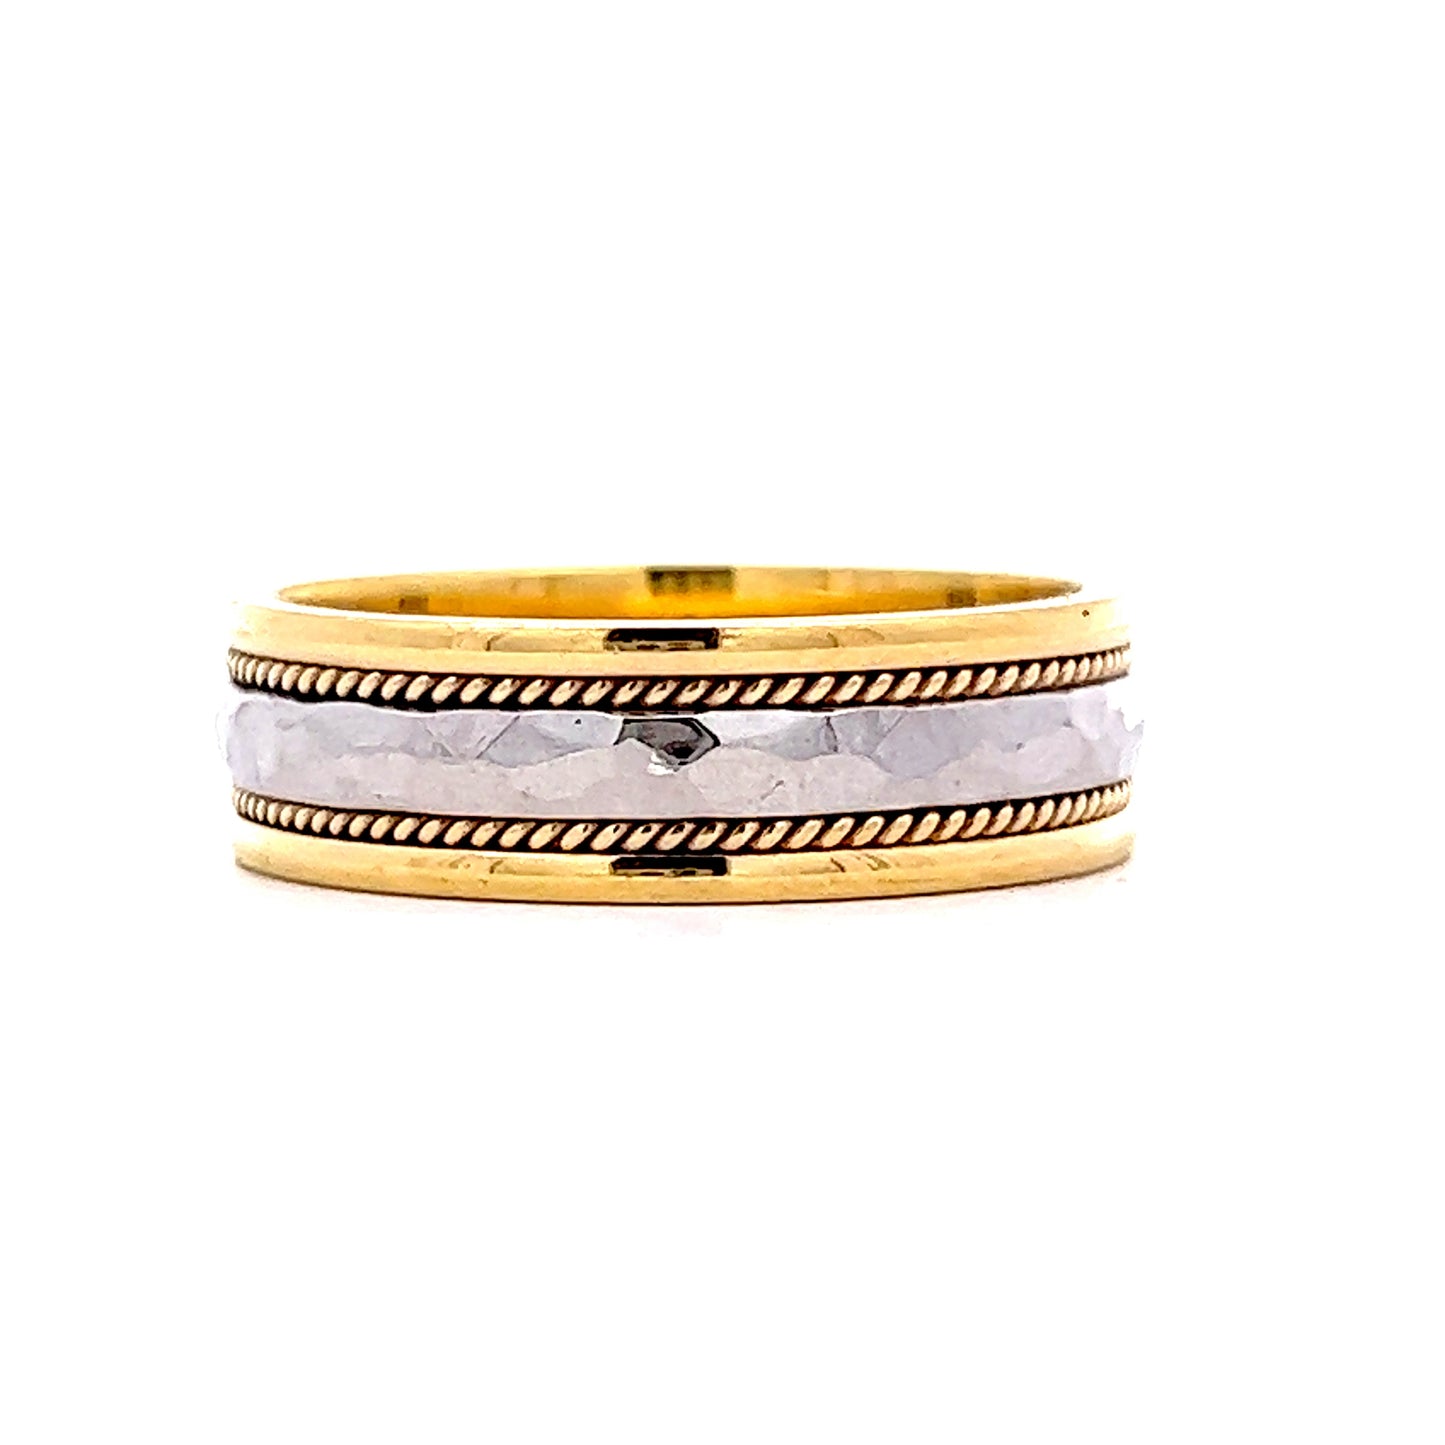 6mm Two-Tone Men's Band in 18k Yellow & Platinum